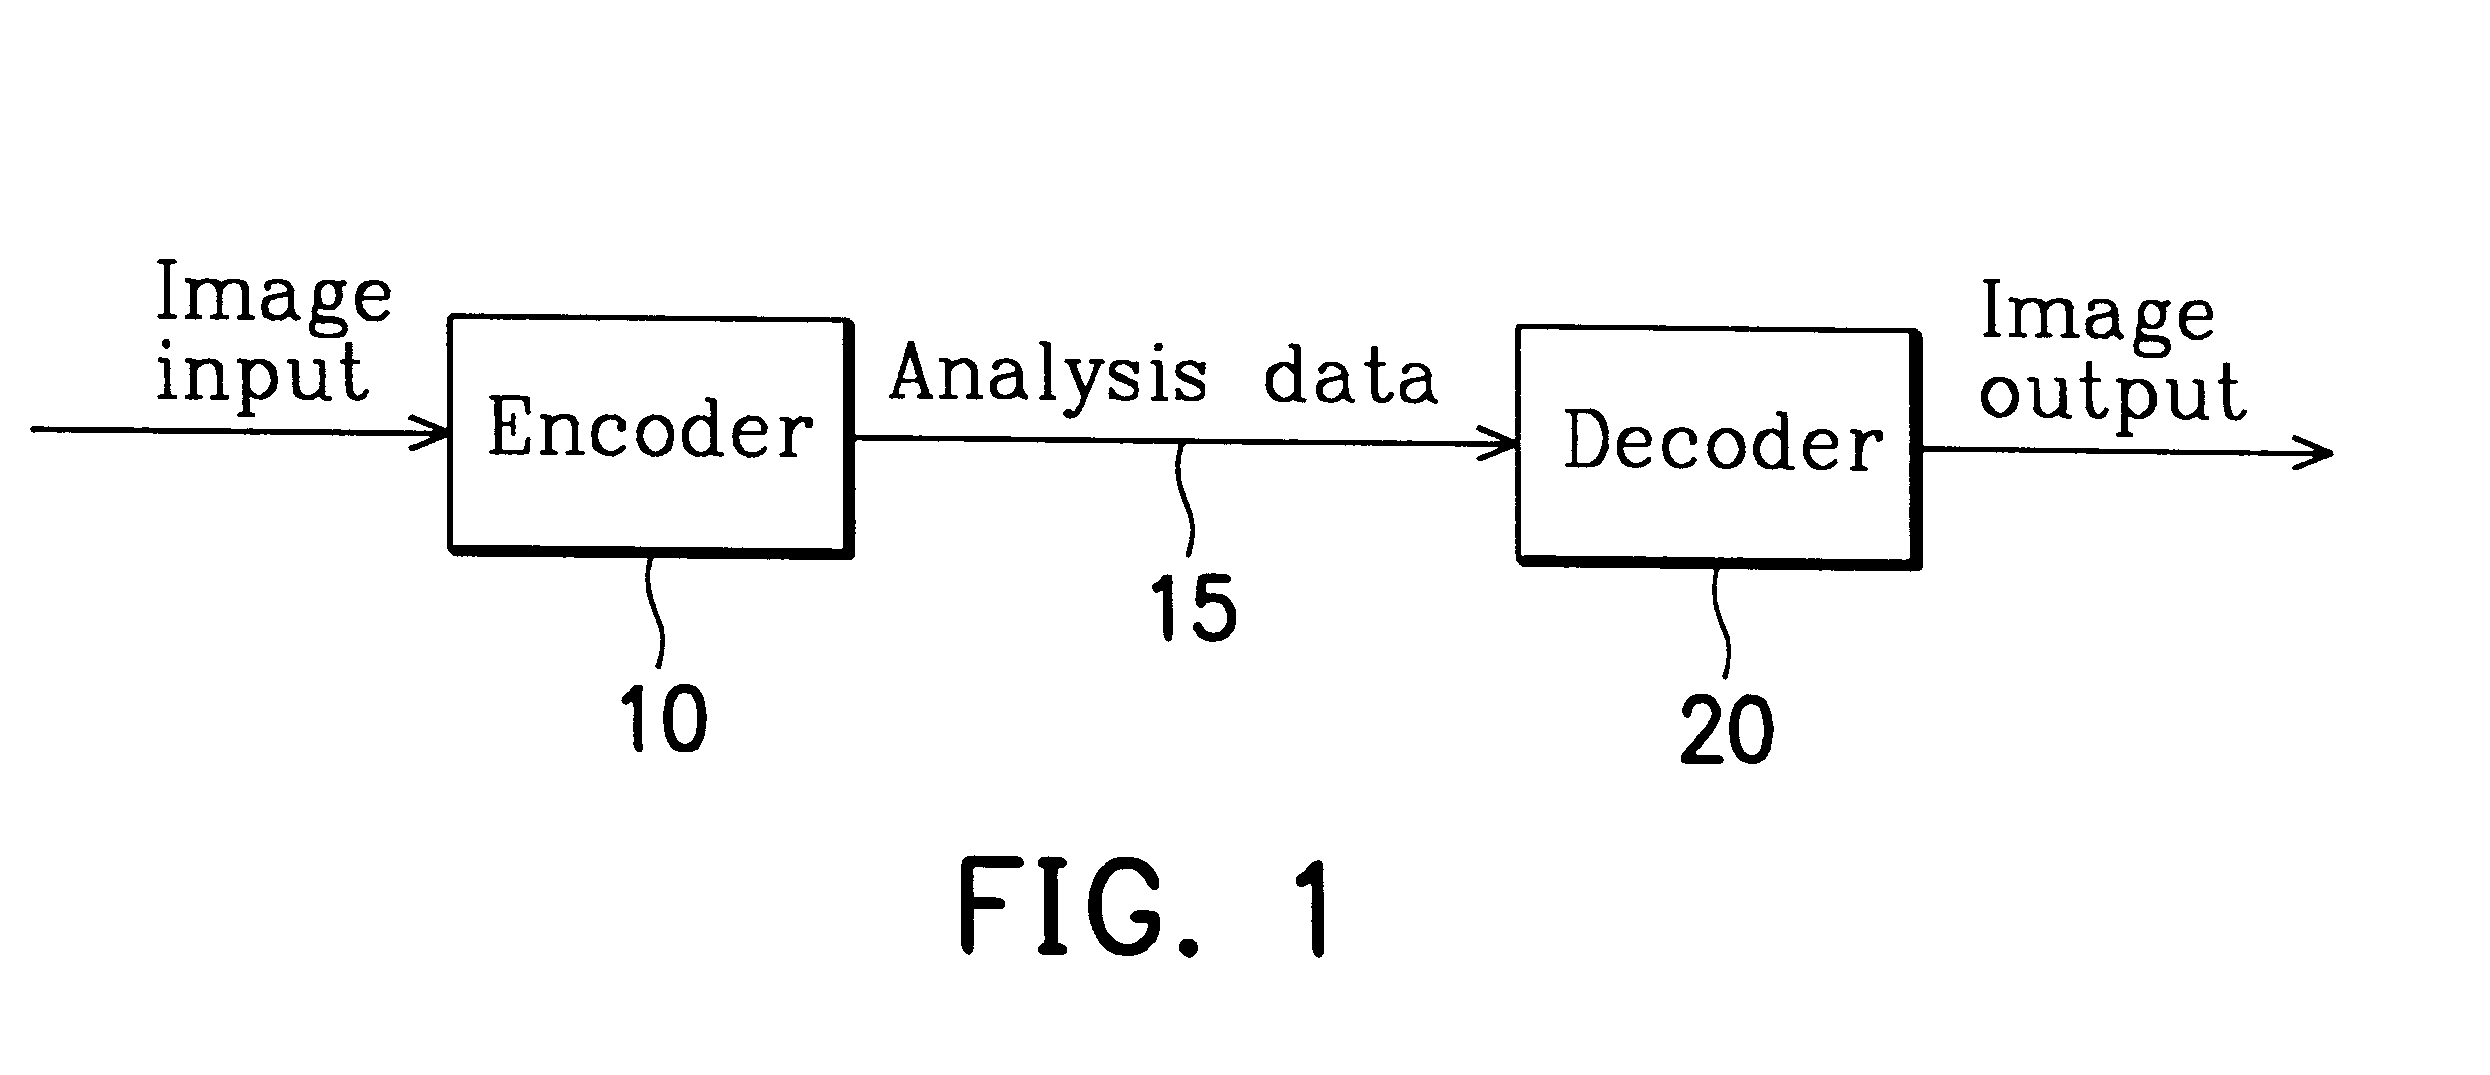 Method of image processing using three facial feature points in three-dimensional head motion tracking